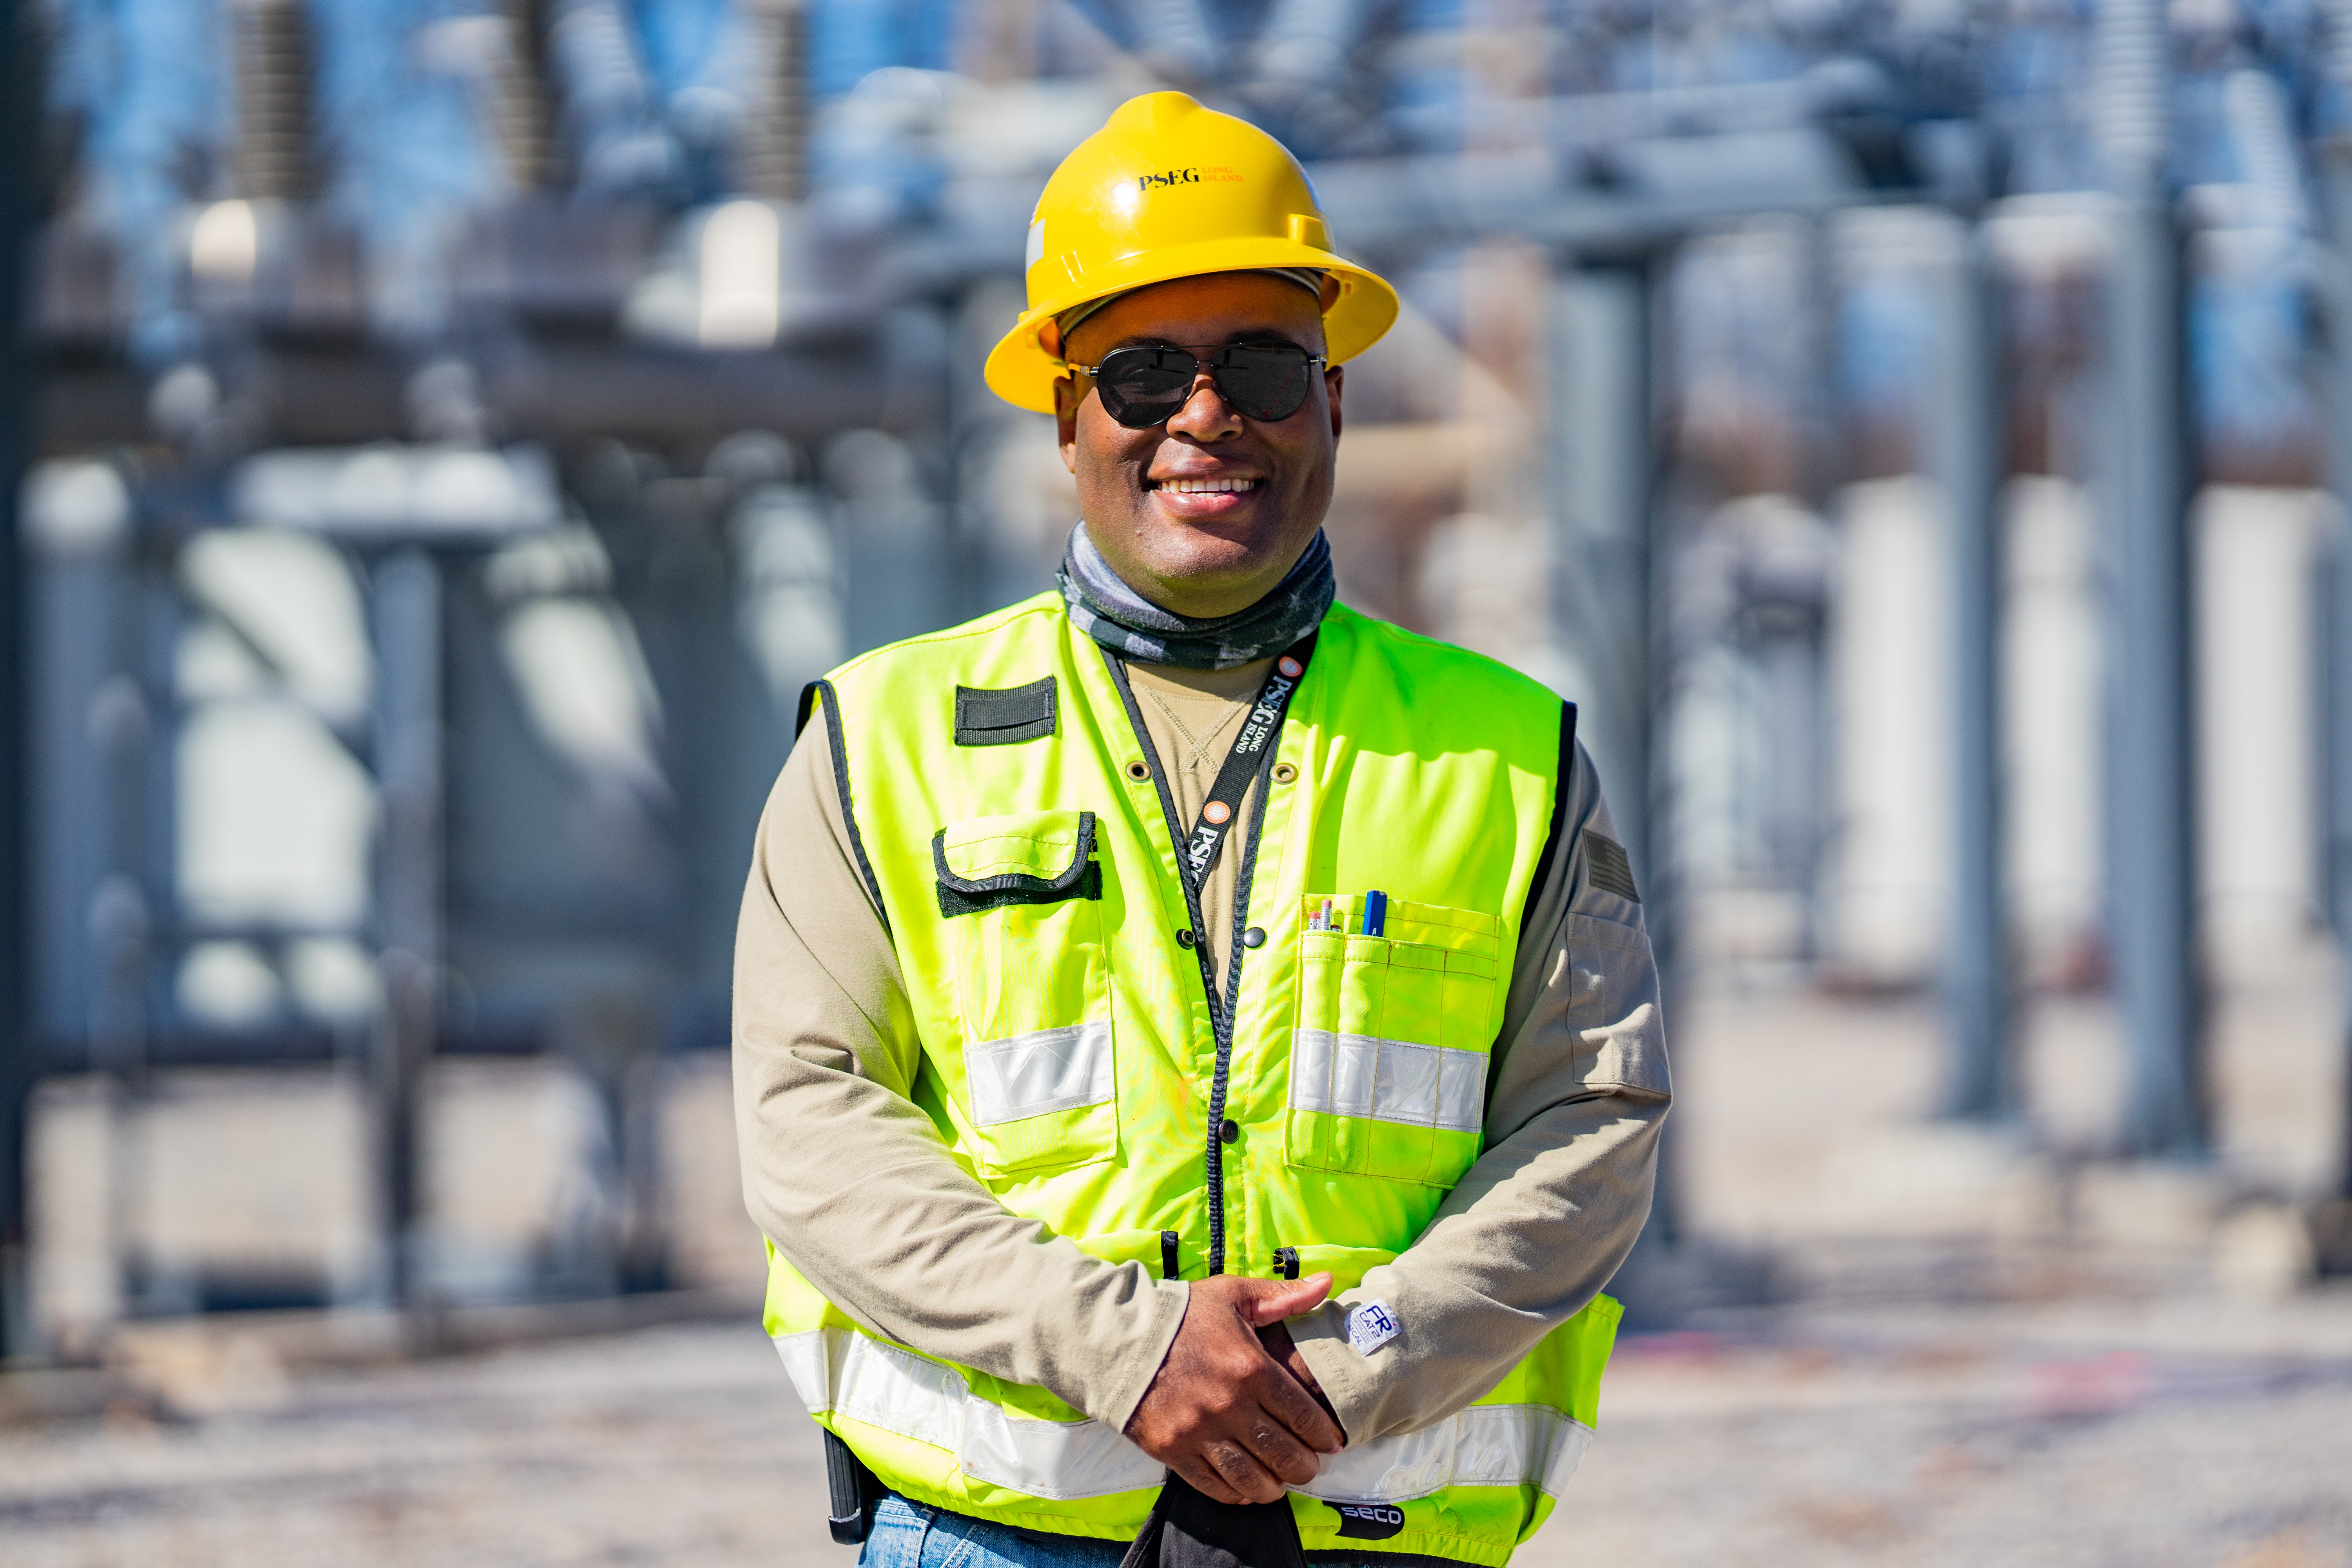 PSEG Long Island Surveyor Terry Small smiles for the camera wearing a hard hat and reflective vest.